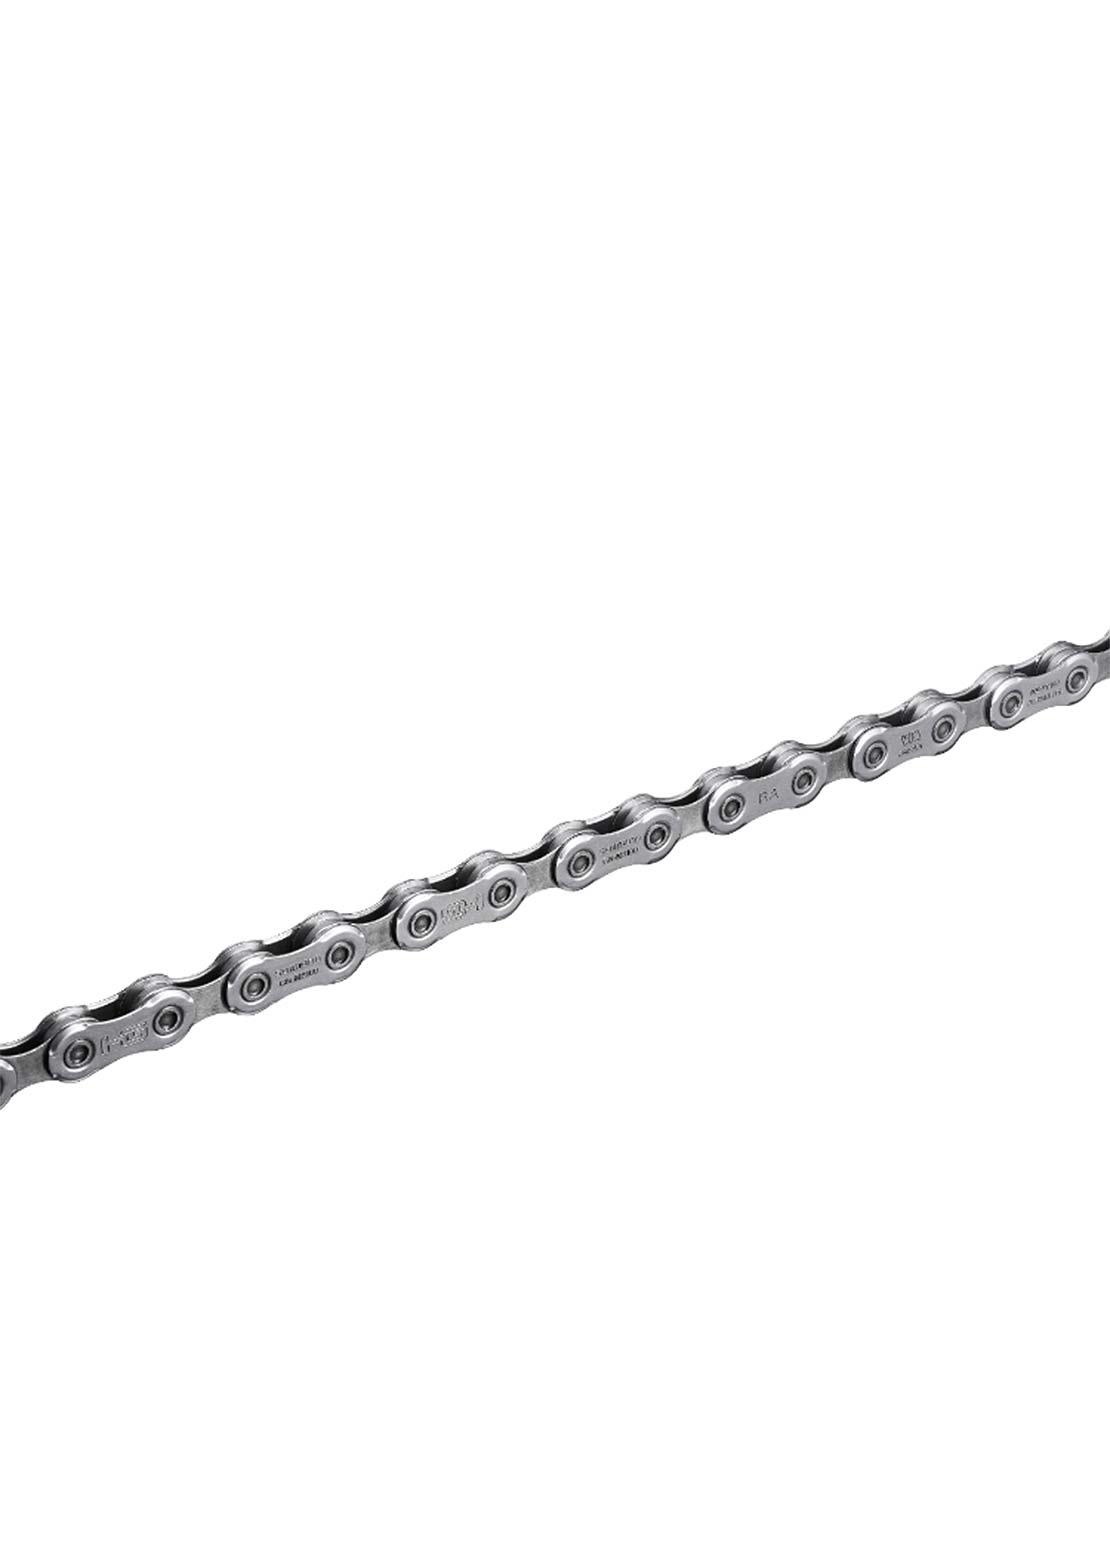 Shimano CN-M8100 Bicycle Chain With Quick-Link